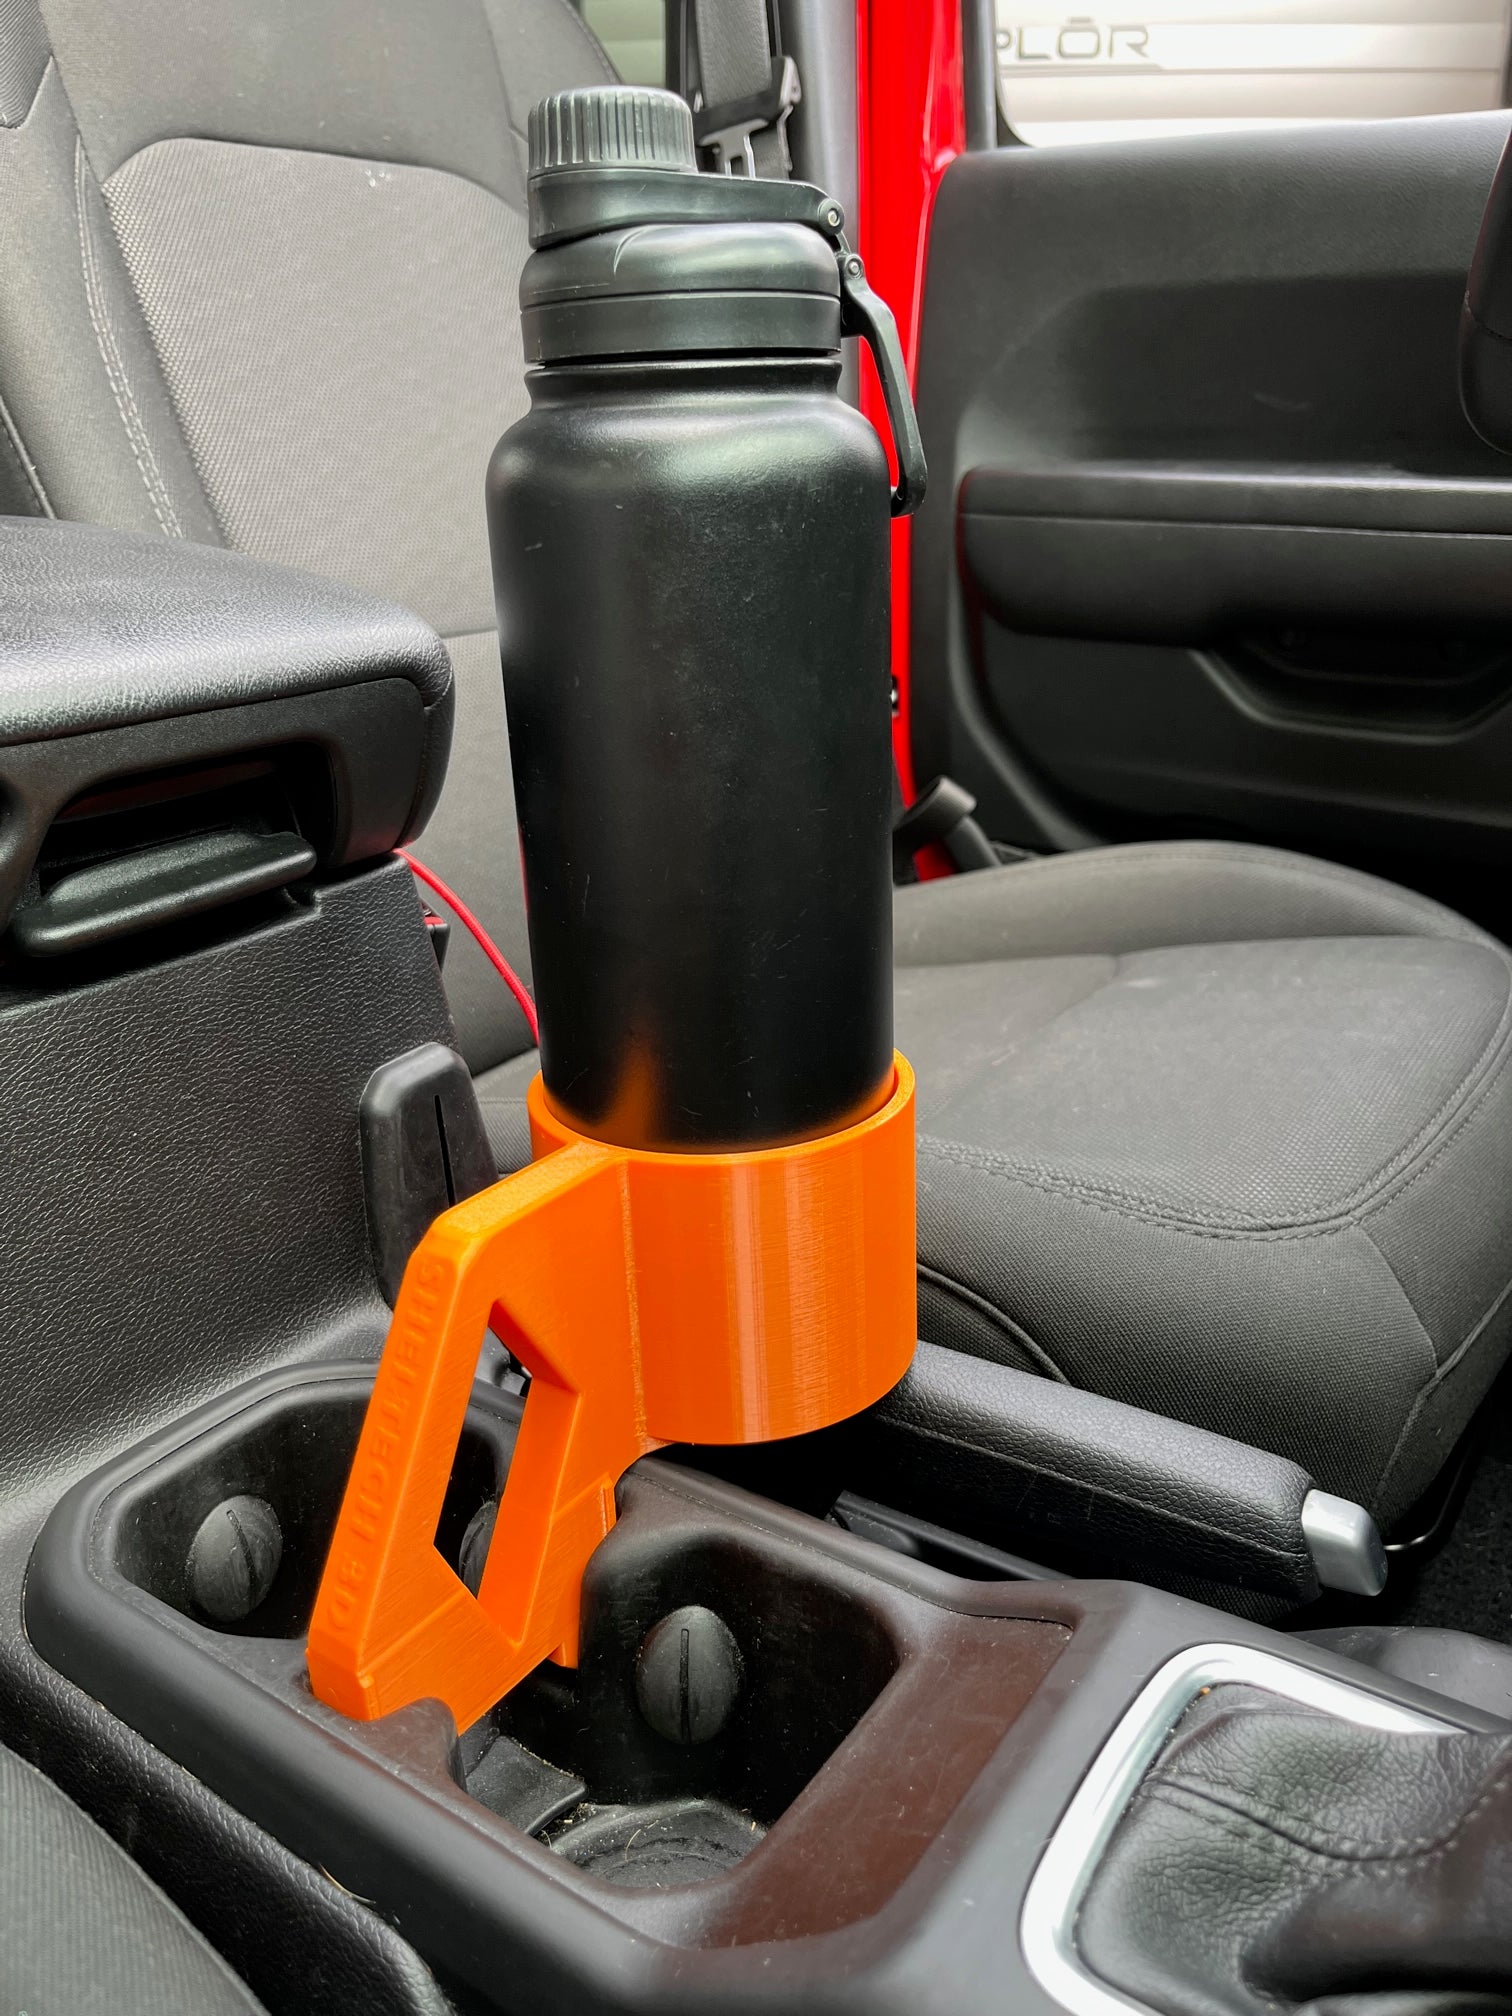 3rd Cup Holder for Jeep JL Wrangler and Gladiator (2018 to Present)